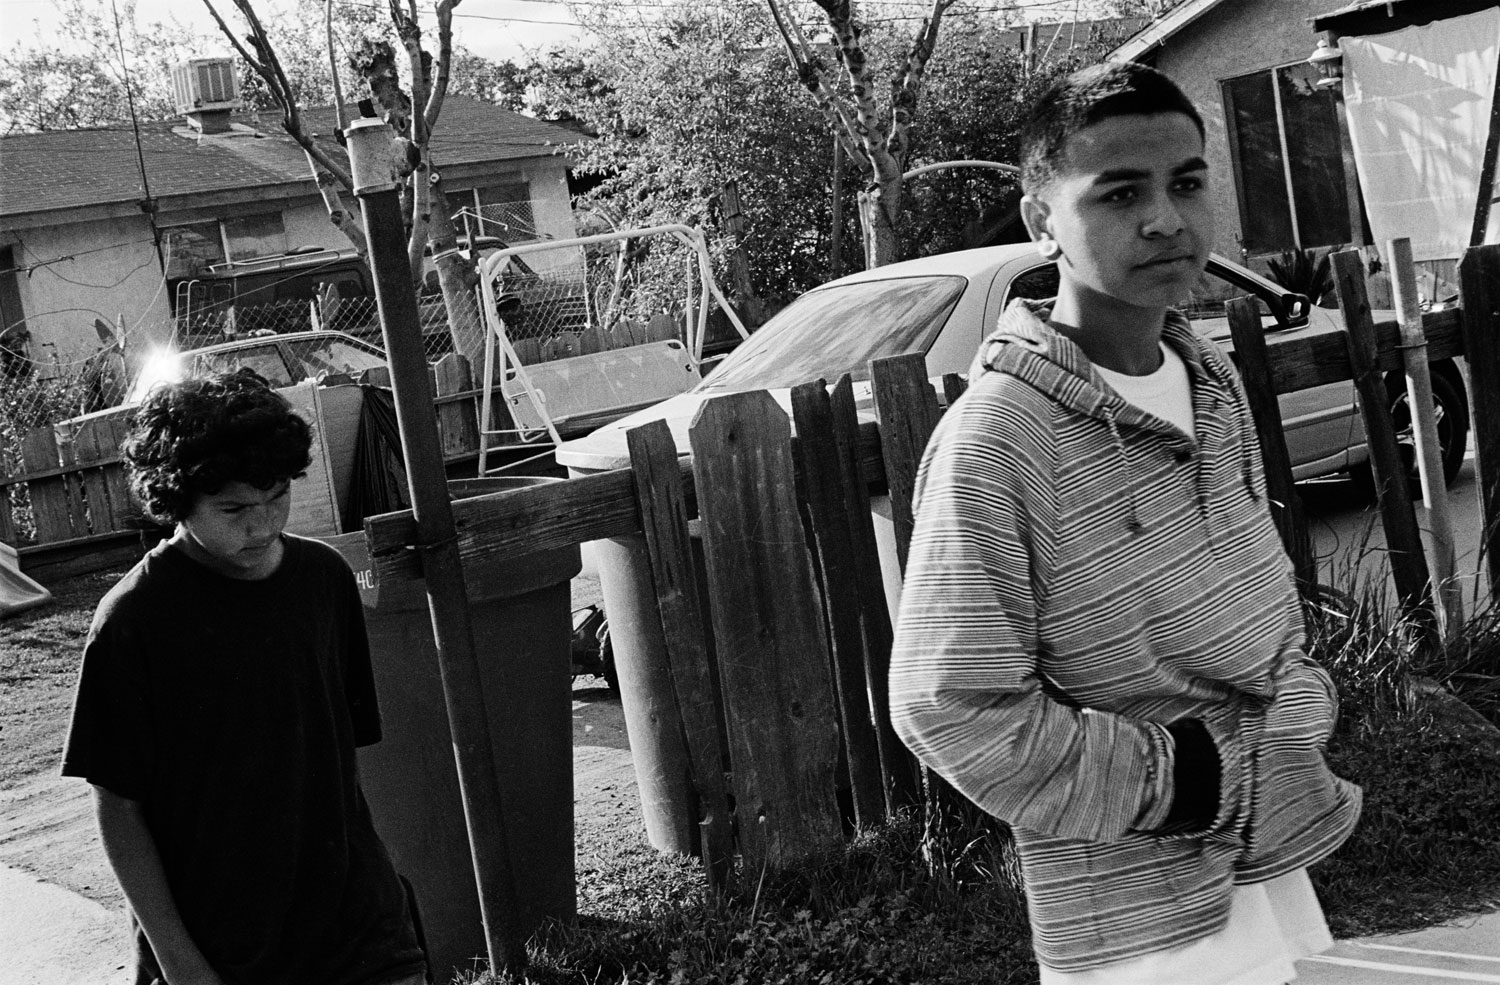 Youth of Woodlake walk the streets. Many complain of a lack of opportunities. Woodlake, Calif., 2012.